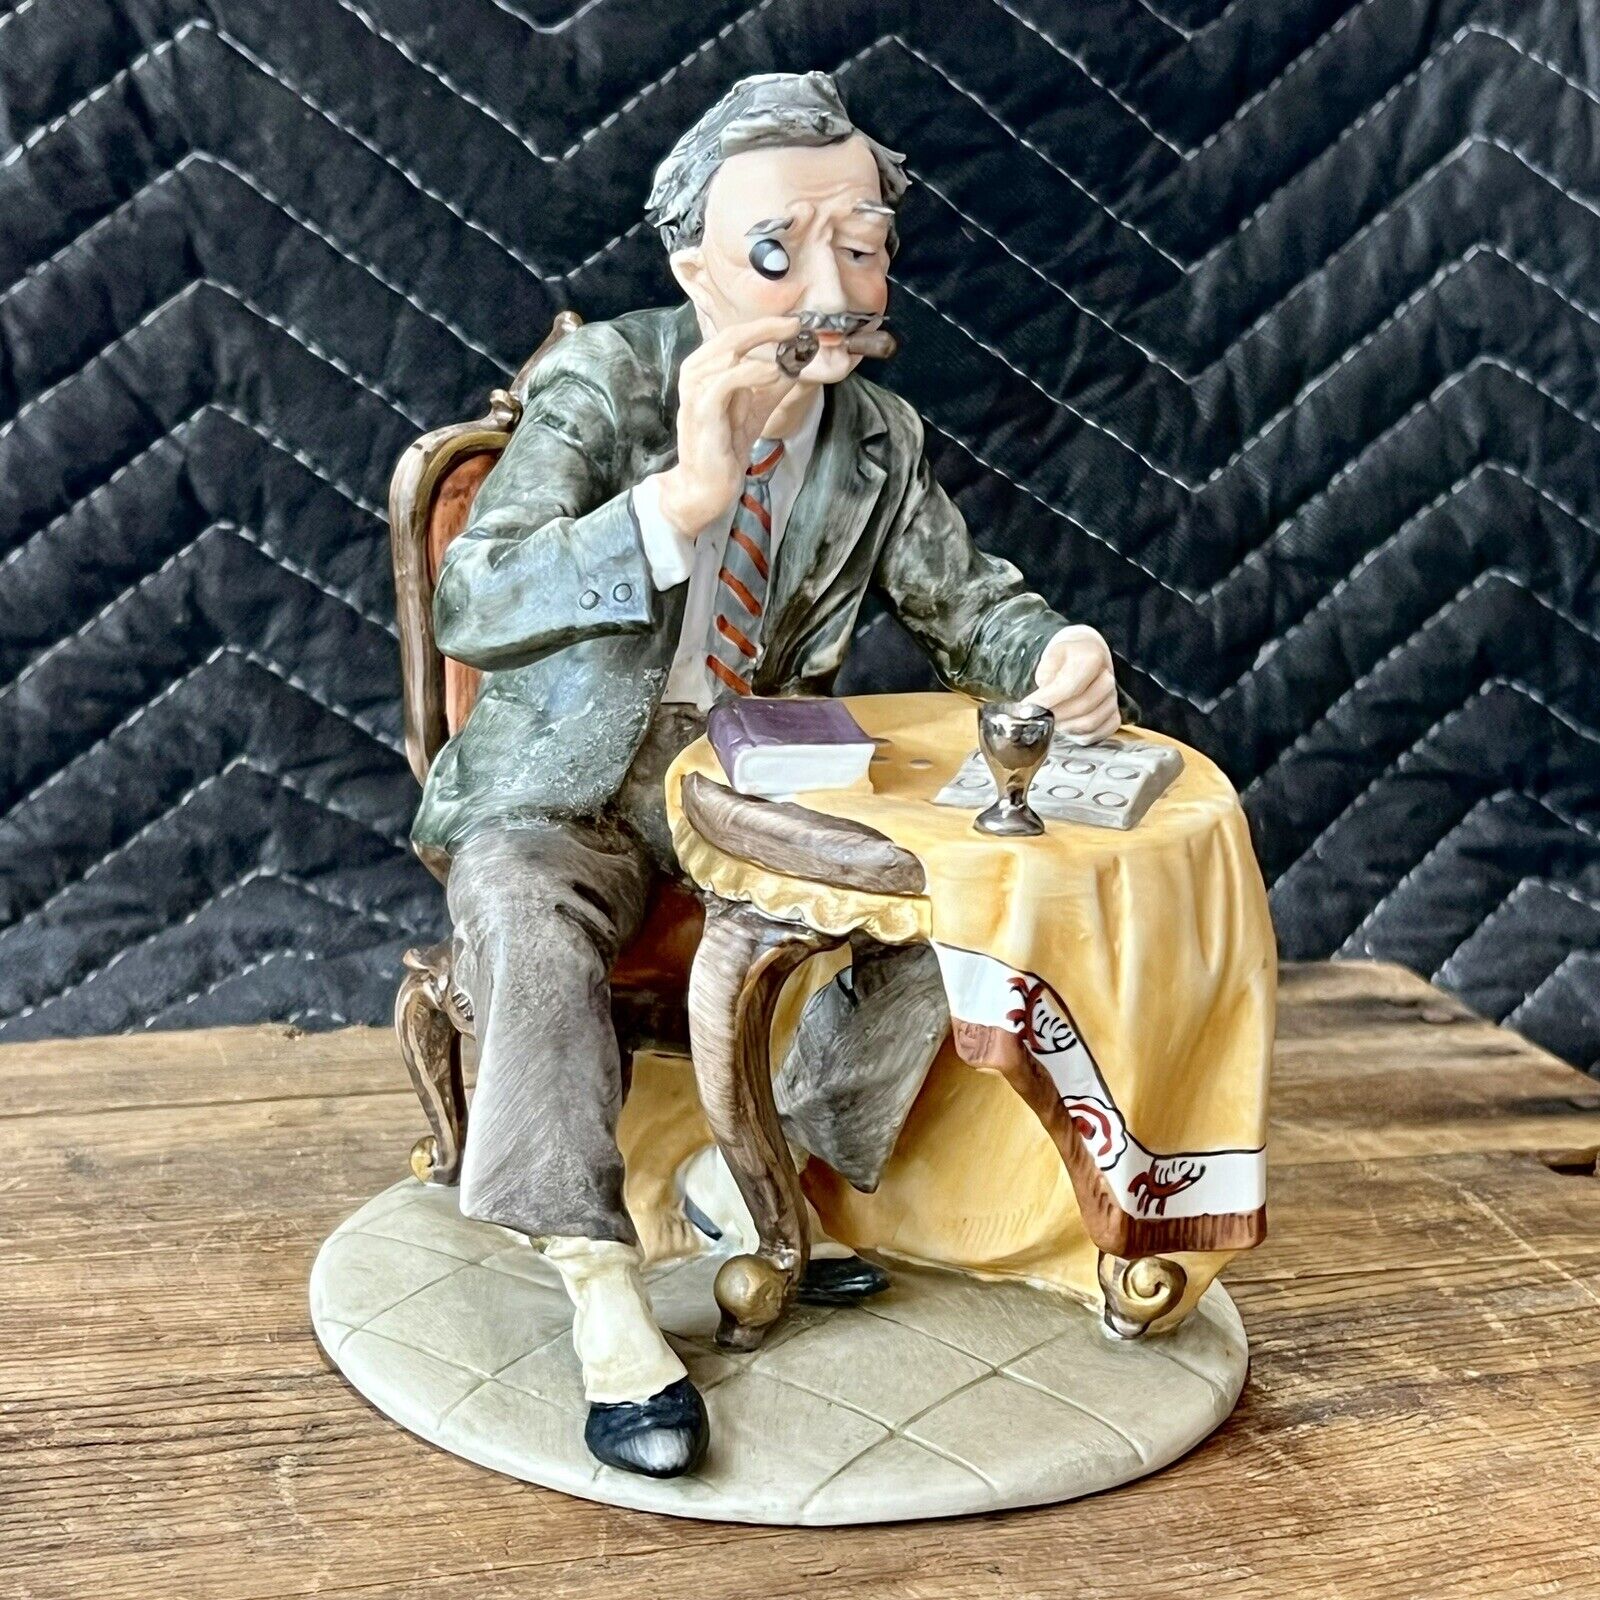 Vintage Bisque Figurine The Coin Collector By Pucci For Capidomonte